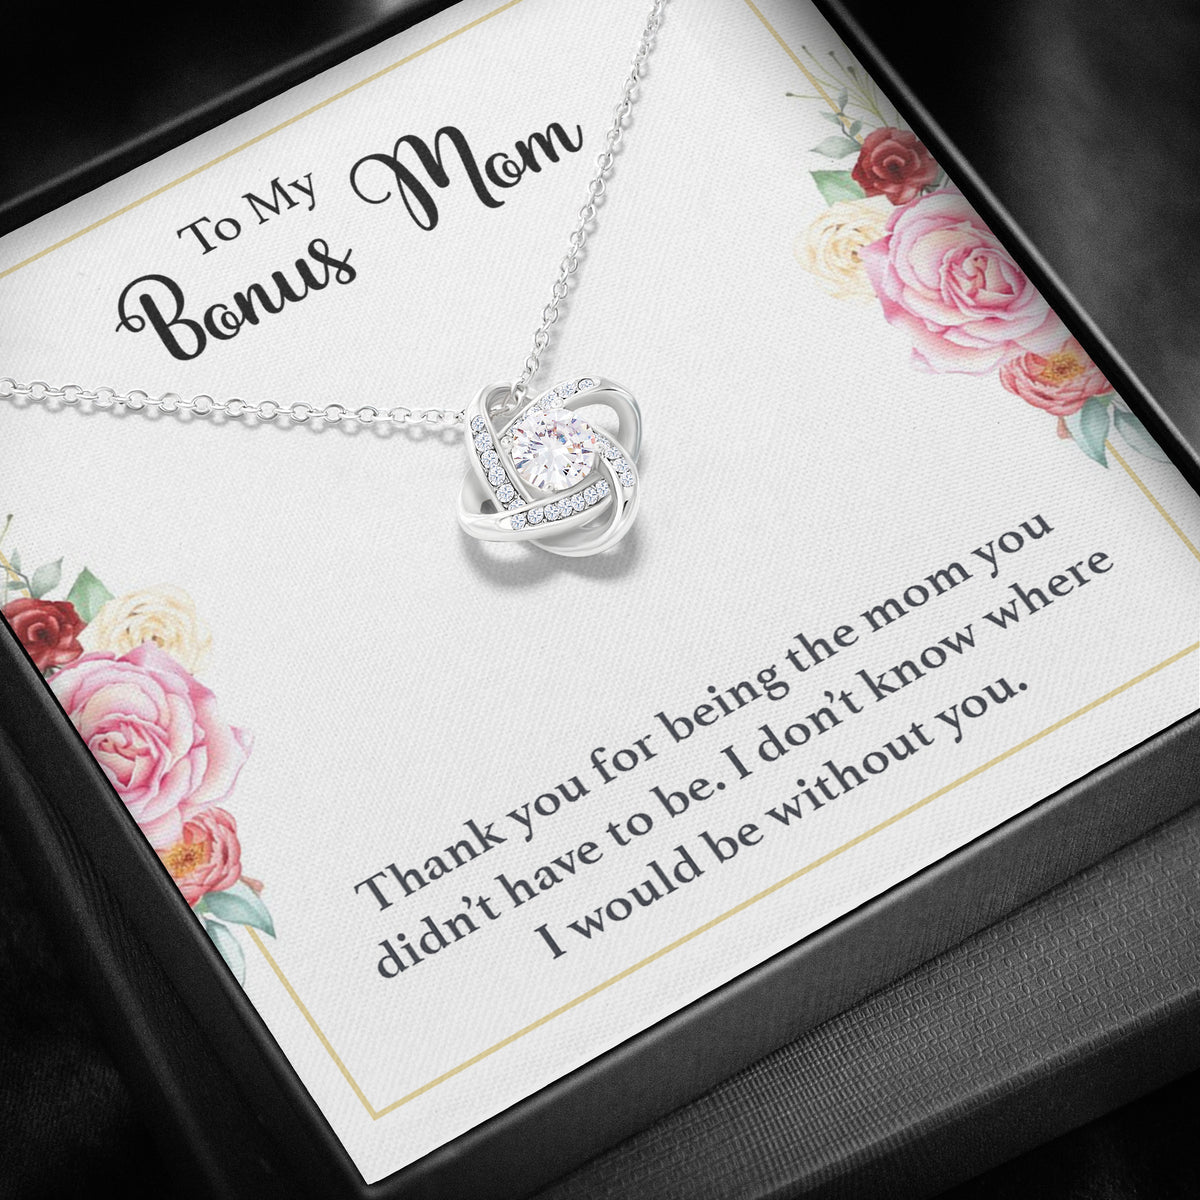 To My Bonus Mom Necklace - Thank You for Being the Mom You didn't Have to Be